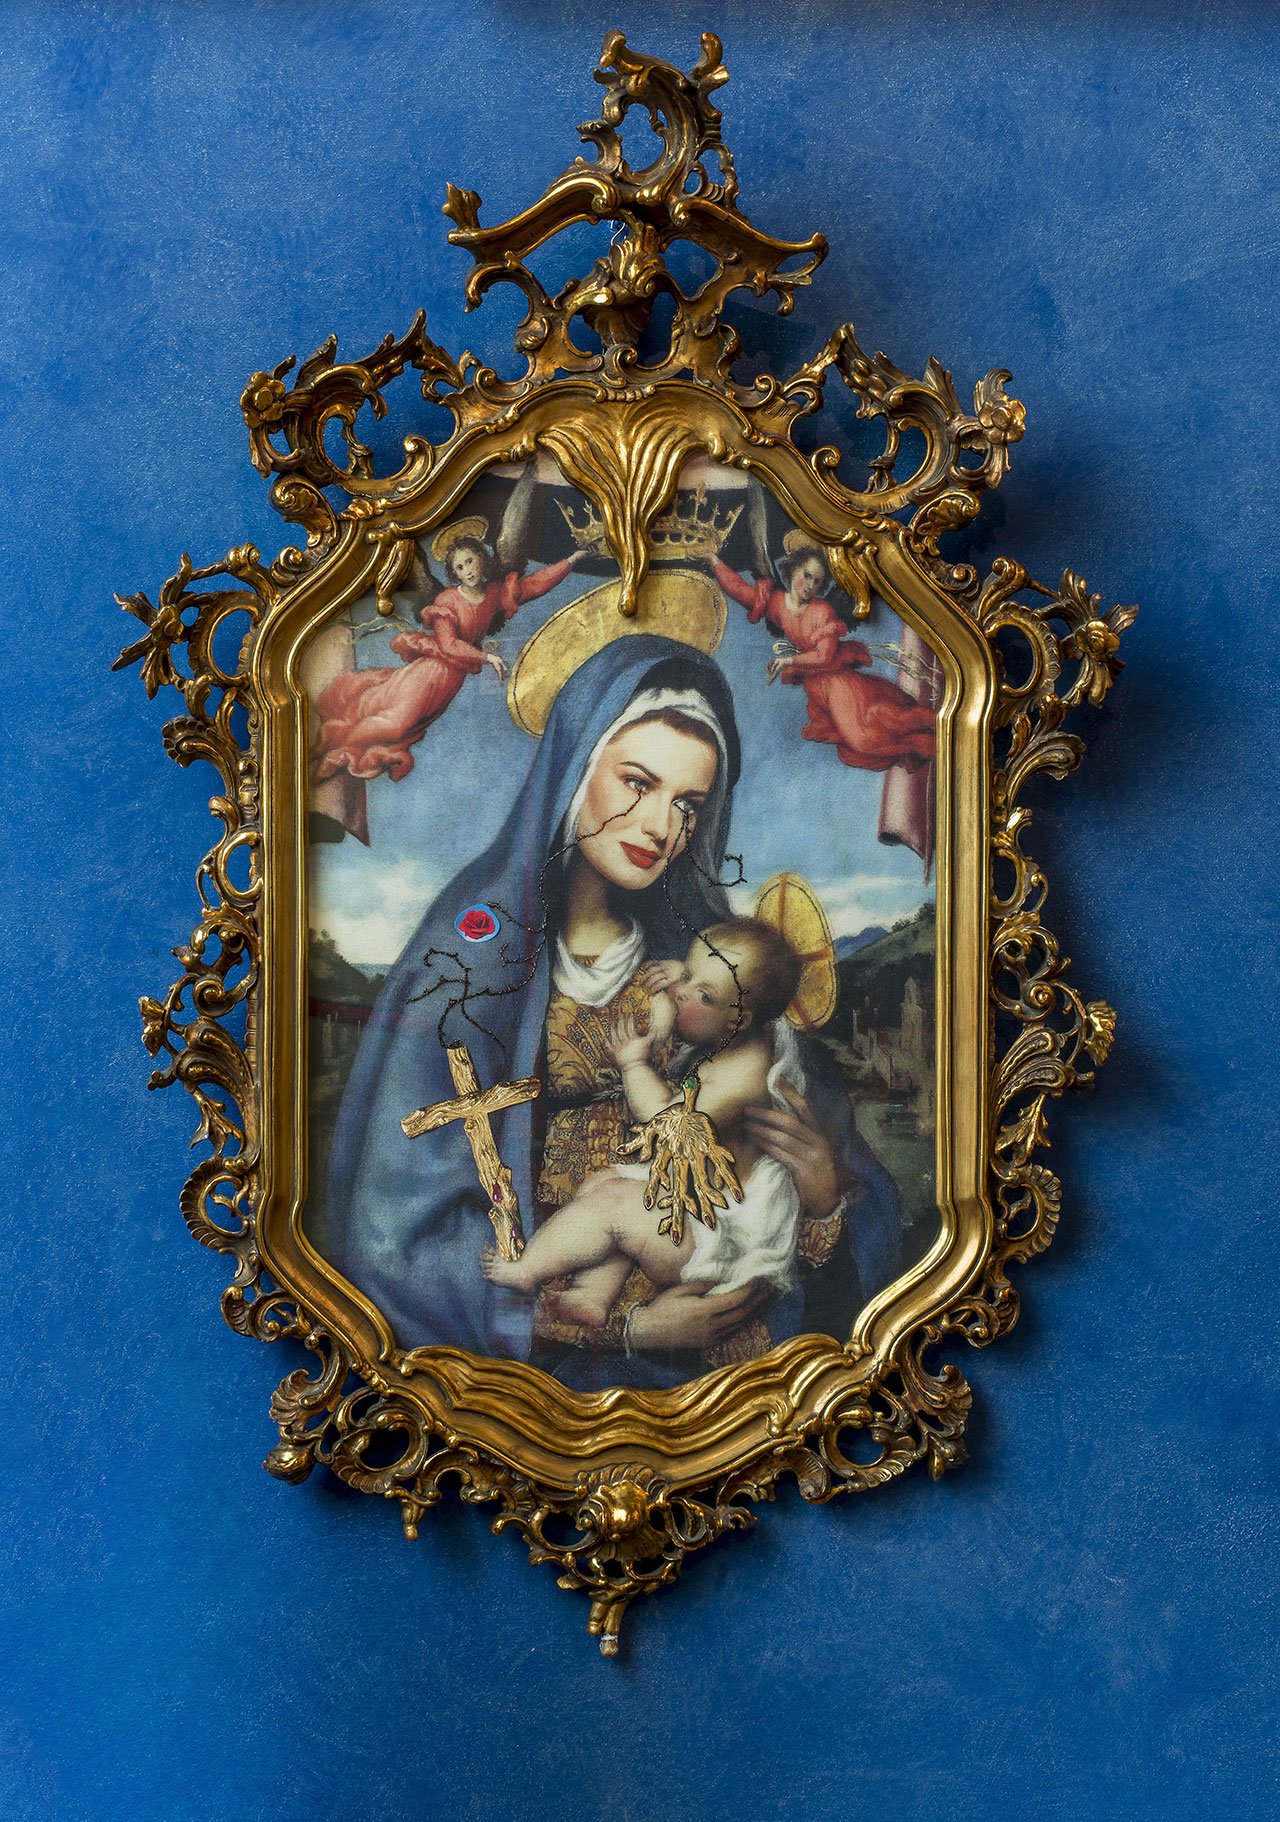 Francesco Vezzoli, Portrait of Paulina Porizkova as a Renaissance Madonna with Holy Child crying Salvador Dalì's jewels (After Lorenzo Lotto), 2011.
Inkjet print on canvas, metallic and cotton embroidery, fabric, custom jewelry, watercolour. 115 x 80 cm.
Courtesy the artist and APALAZZOGALLERY.